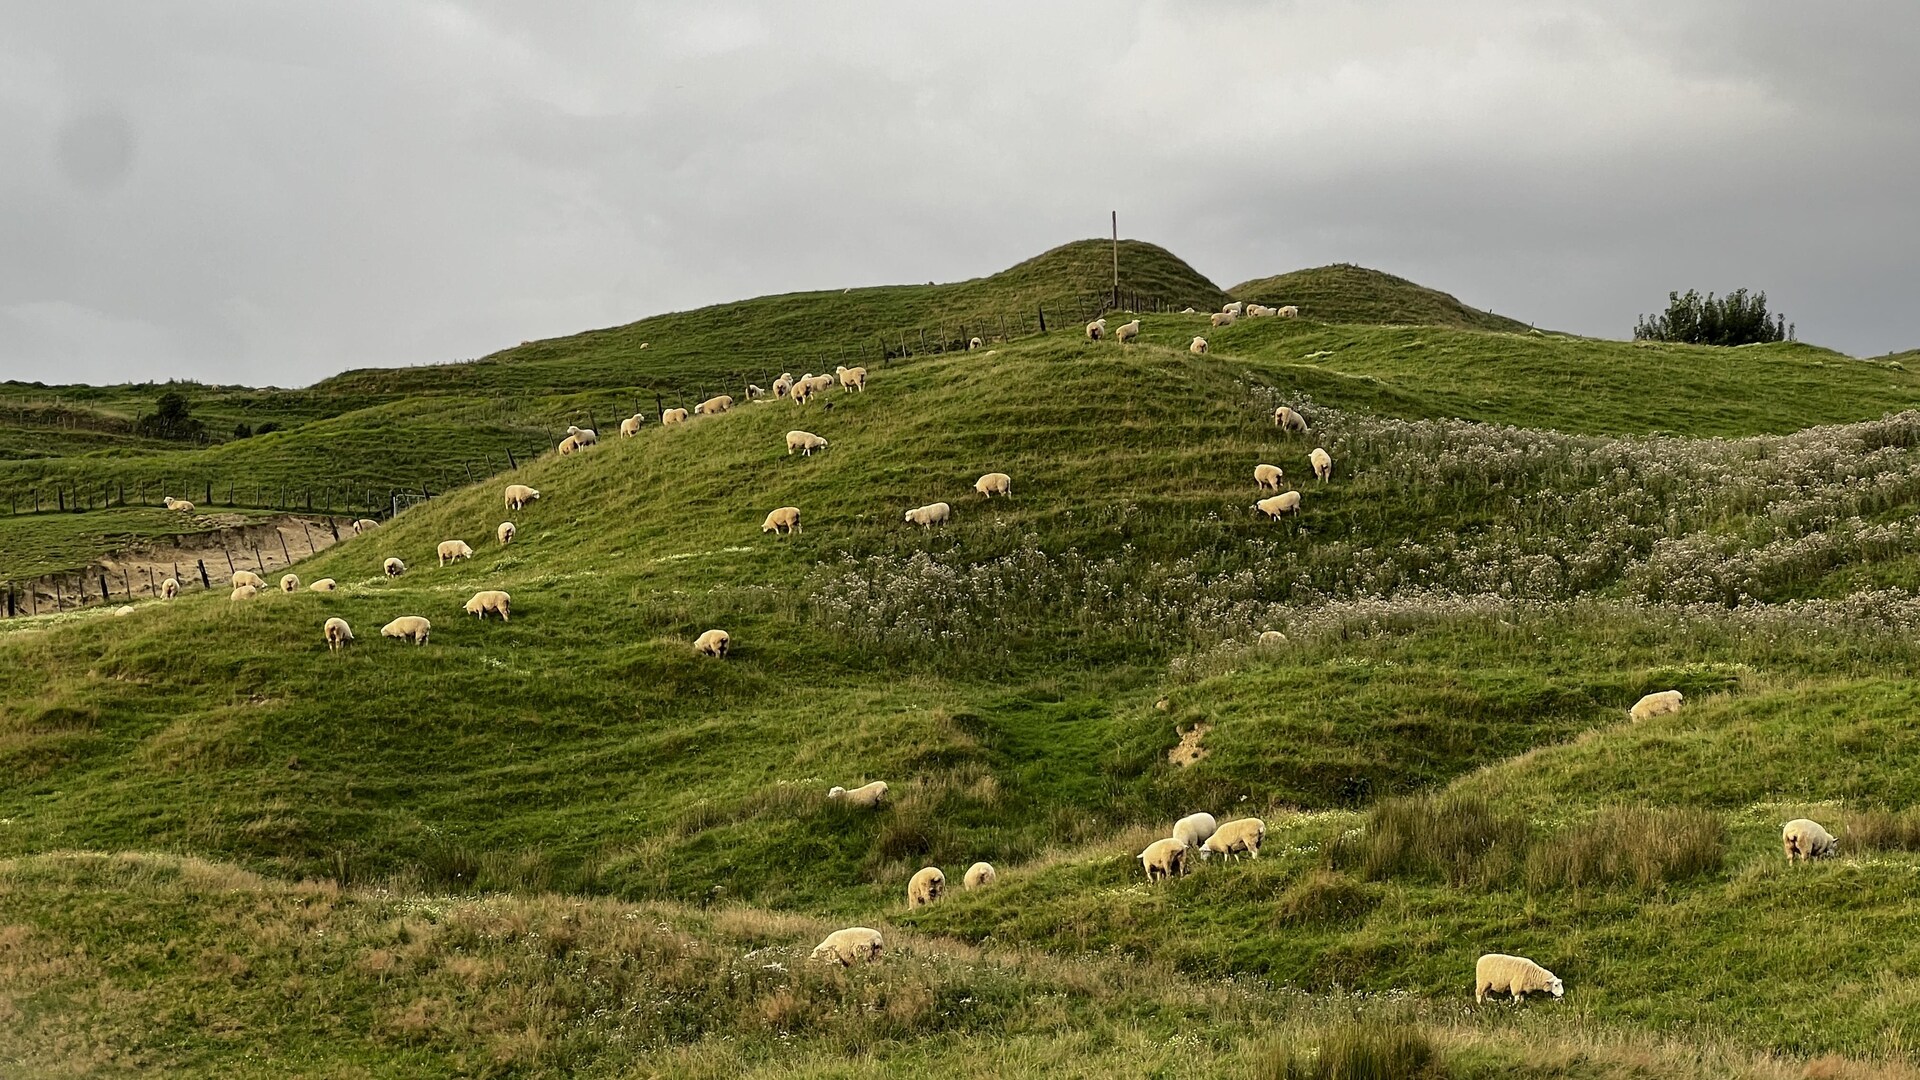 Sheep graze on hills covered with greenery.